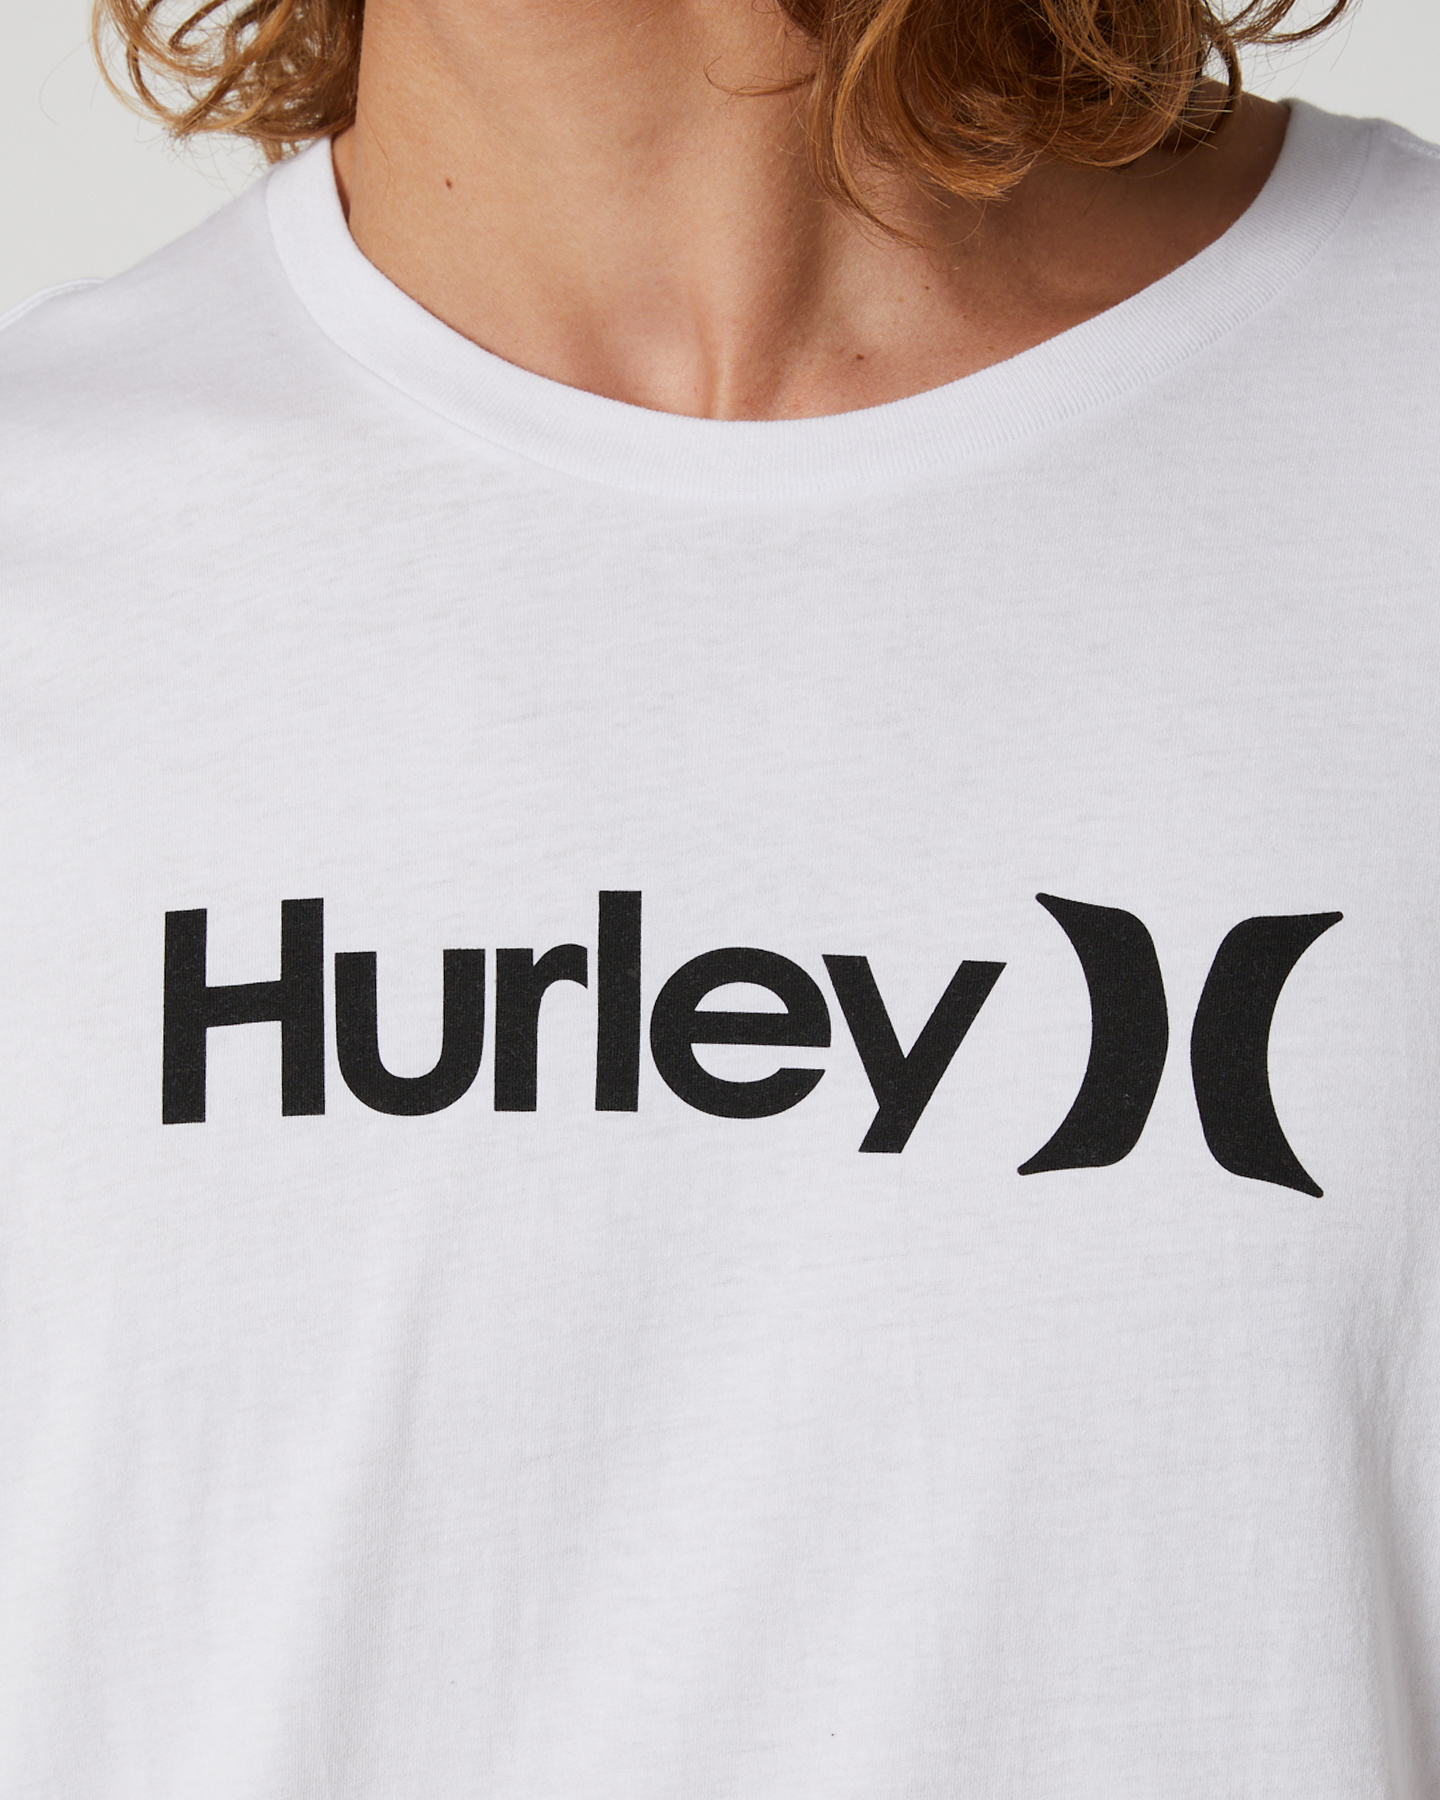 Hurley Evd Wsh Core Oao Solid Mens Tee - White